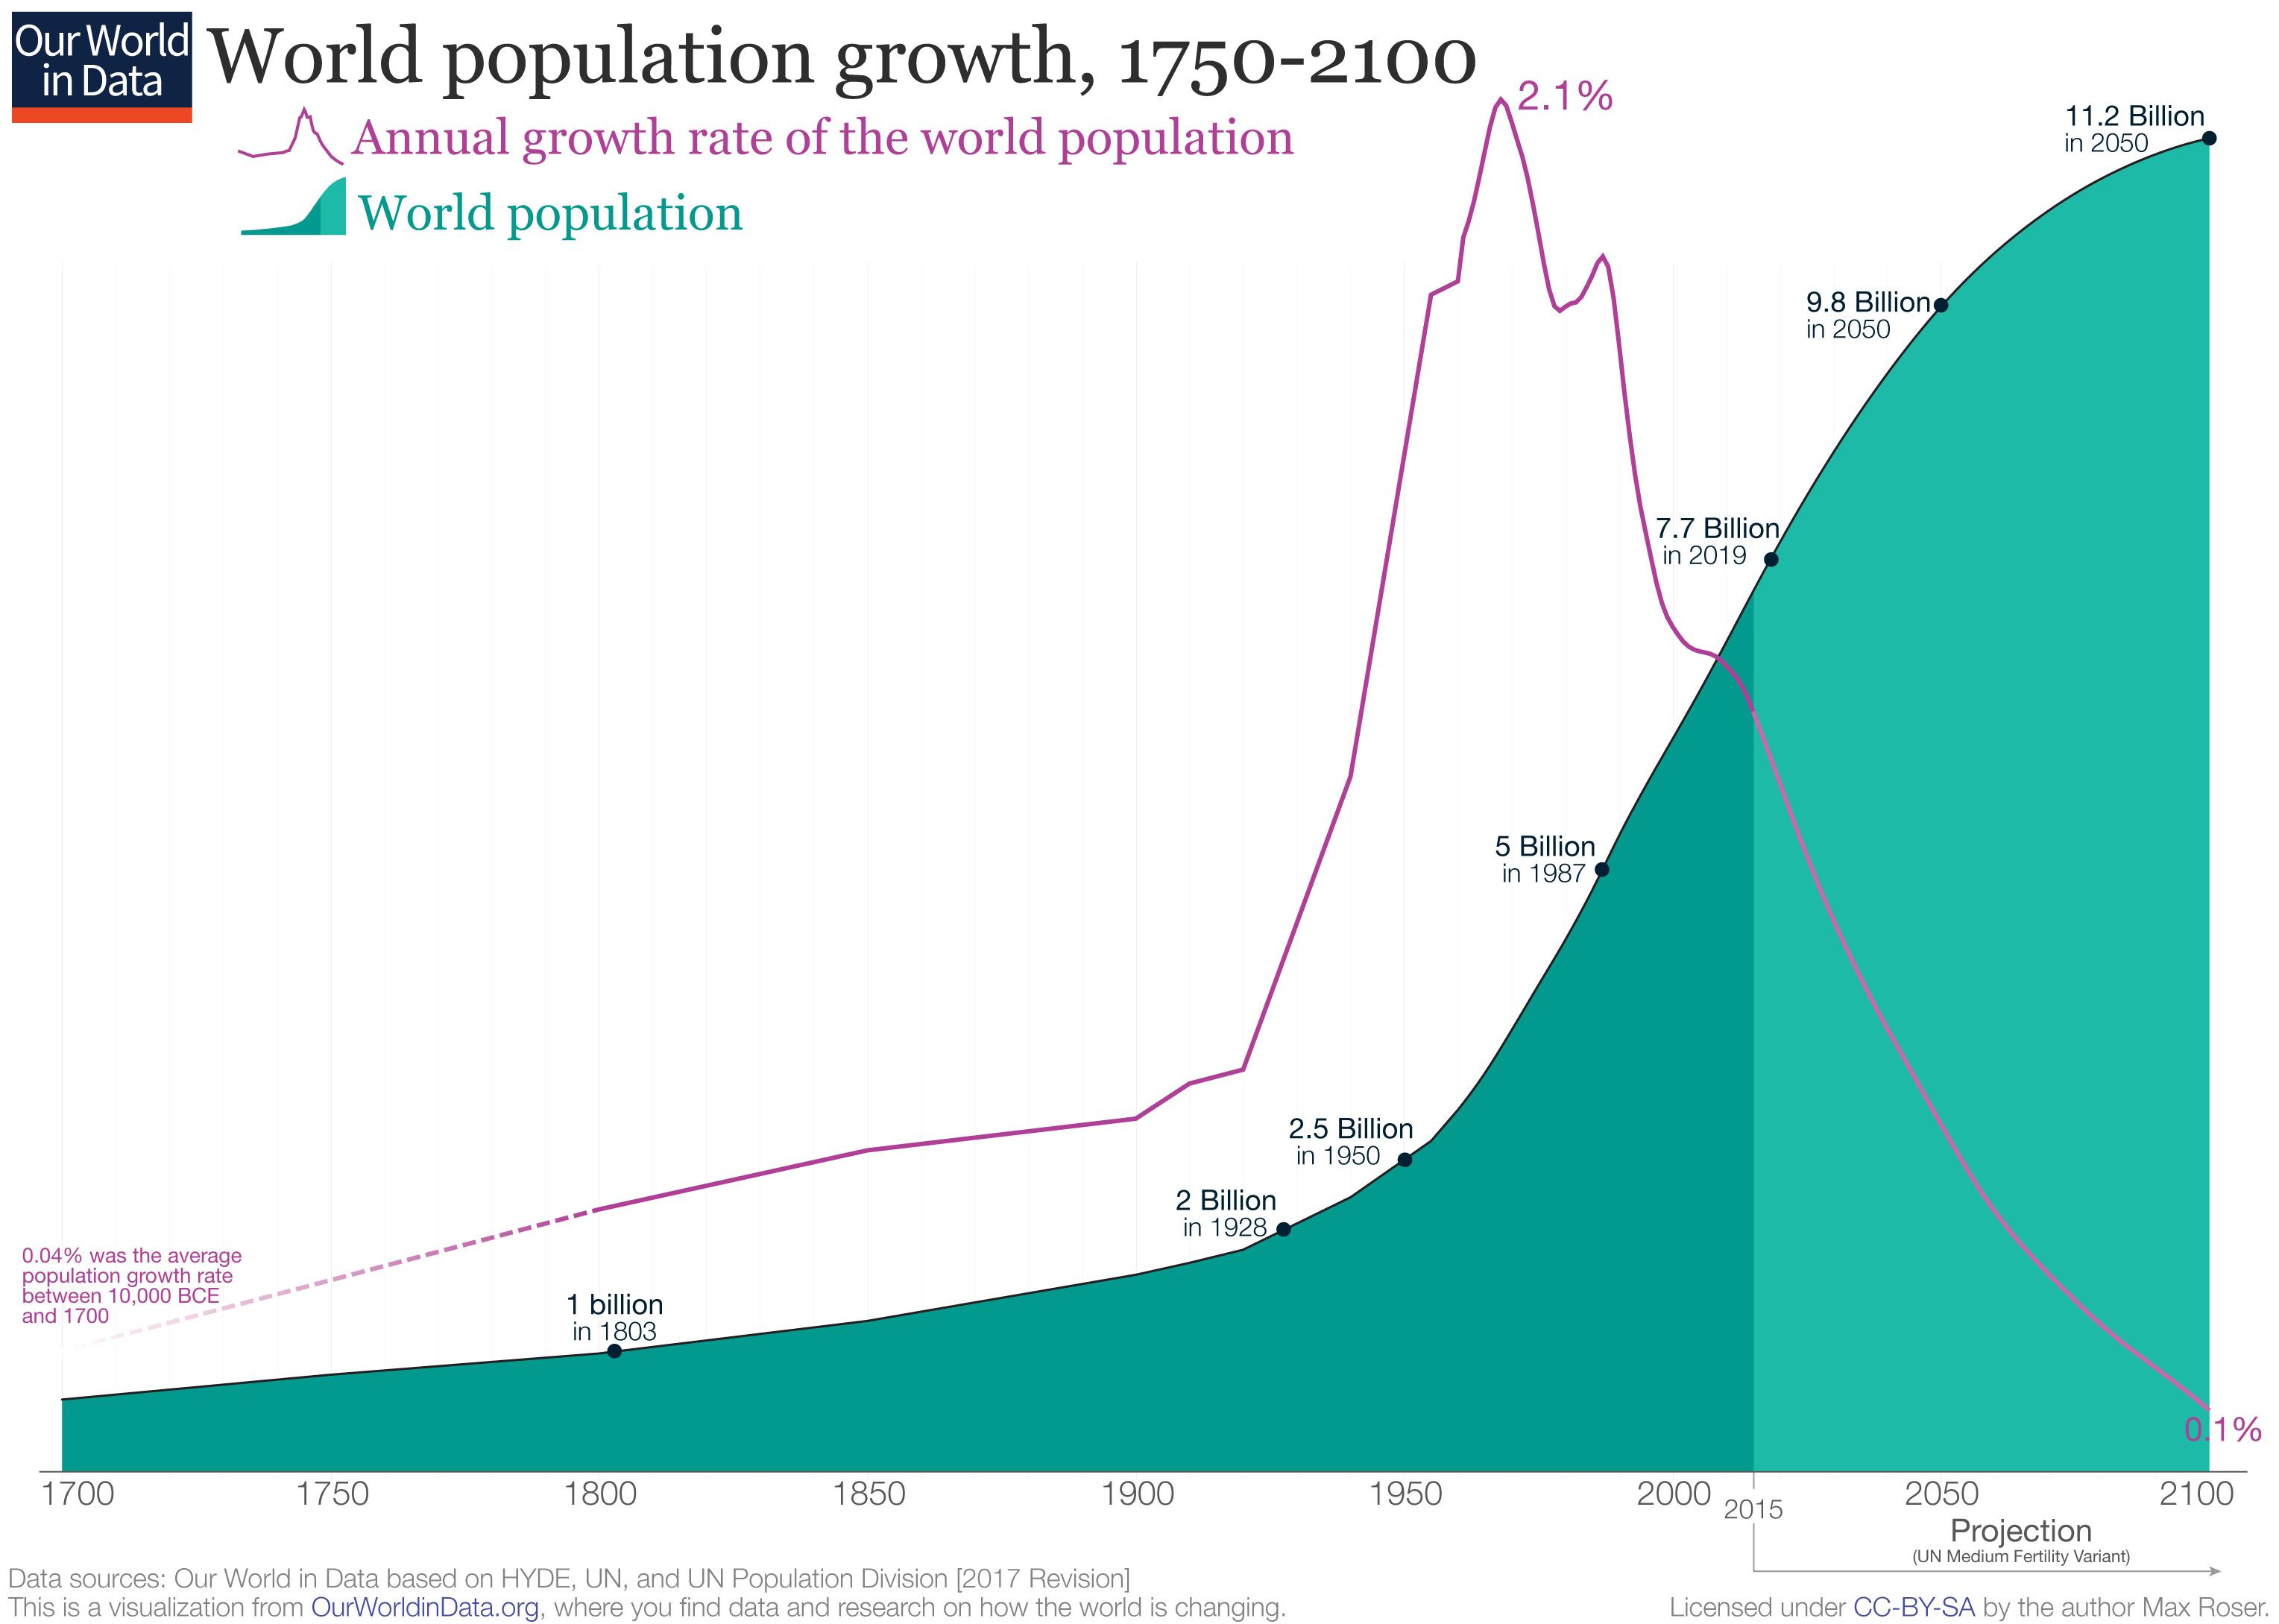 An area chart of the world population since 1750, plus a line chart of the population growth rate on top. It shows a peak in the population growth rate in the 1960s.